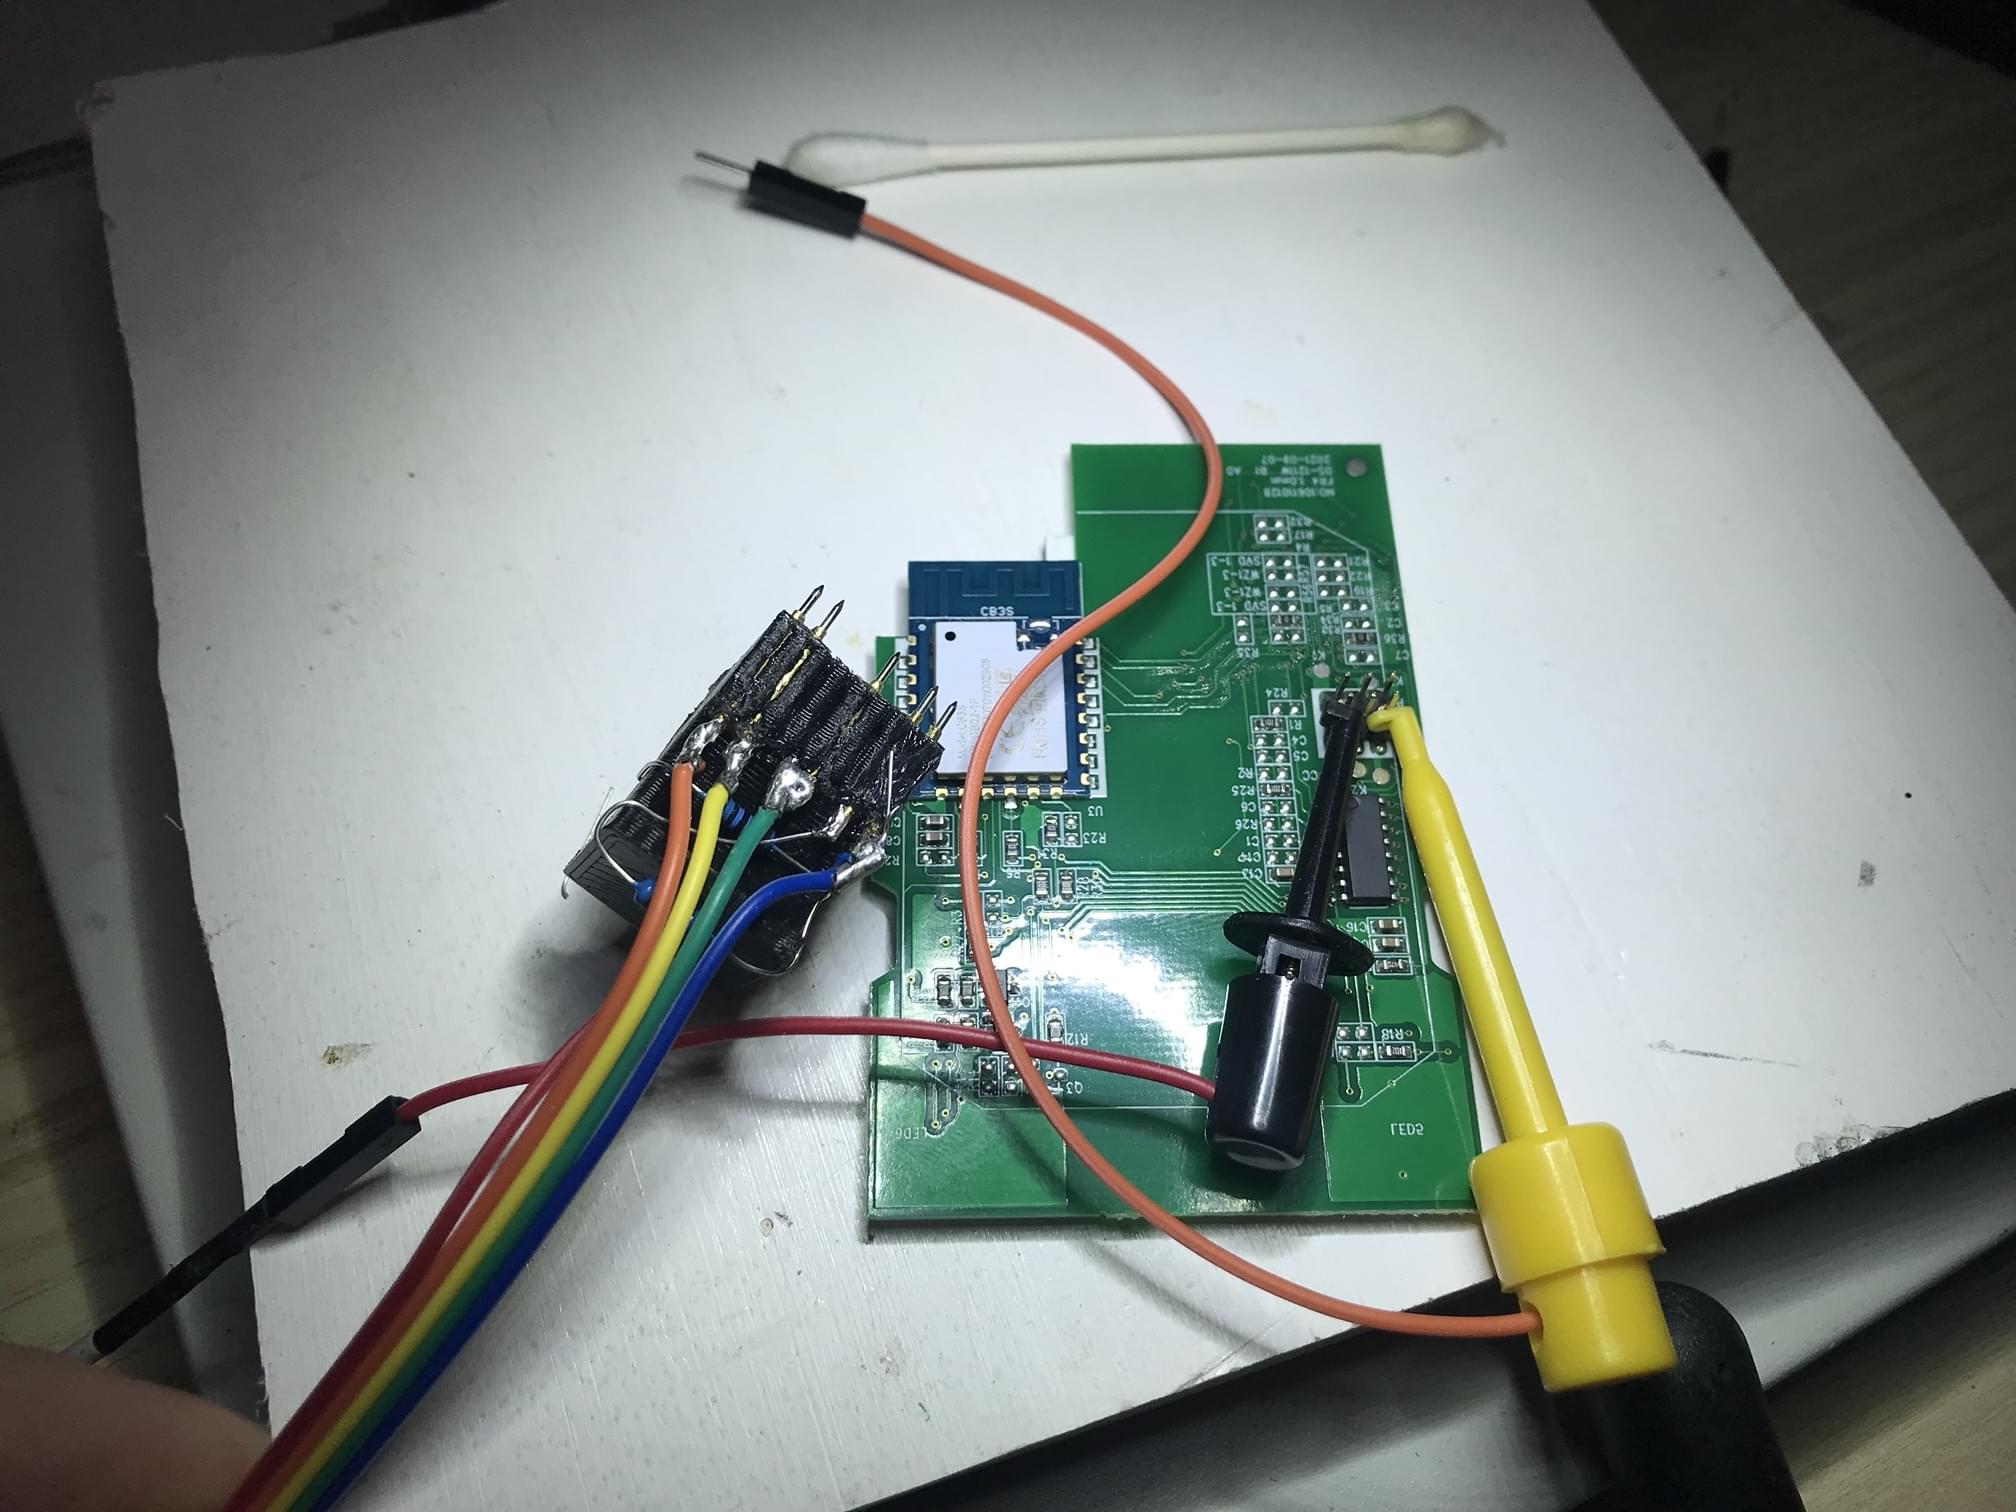 Serial connction hooked up to a pogo-pin jig for ESP modules